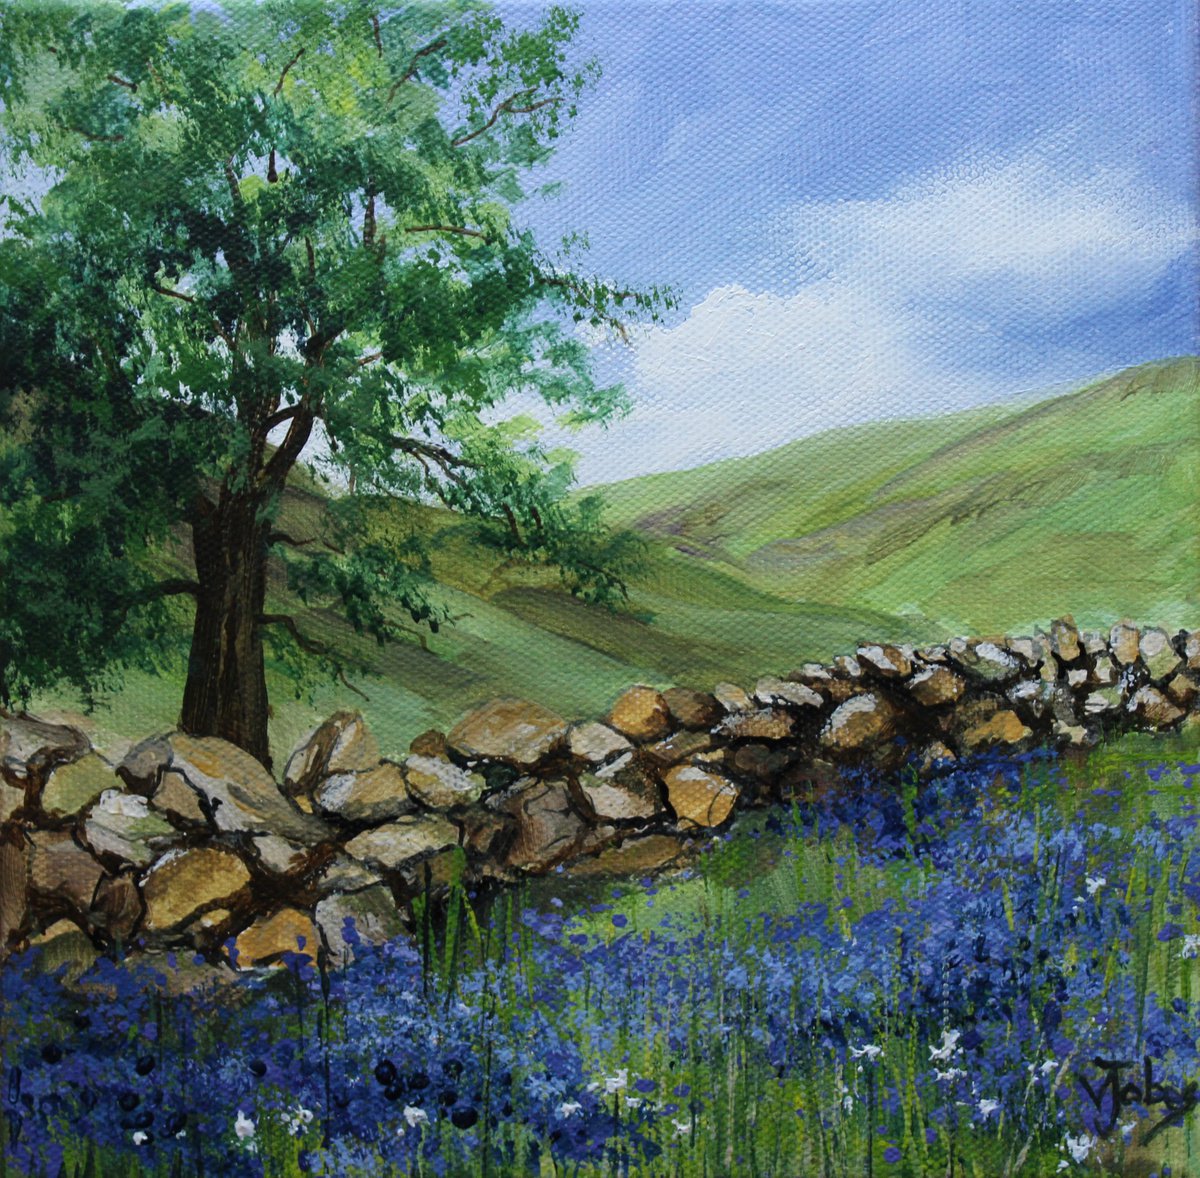 Bluebells by the Old Stone Wall by Valerie Jobes